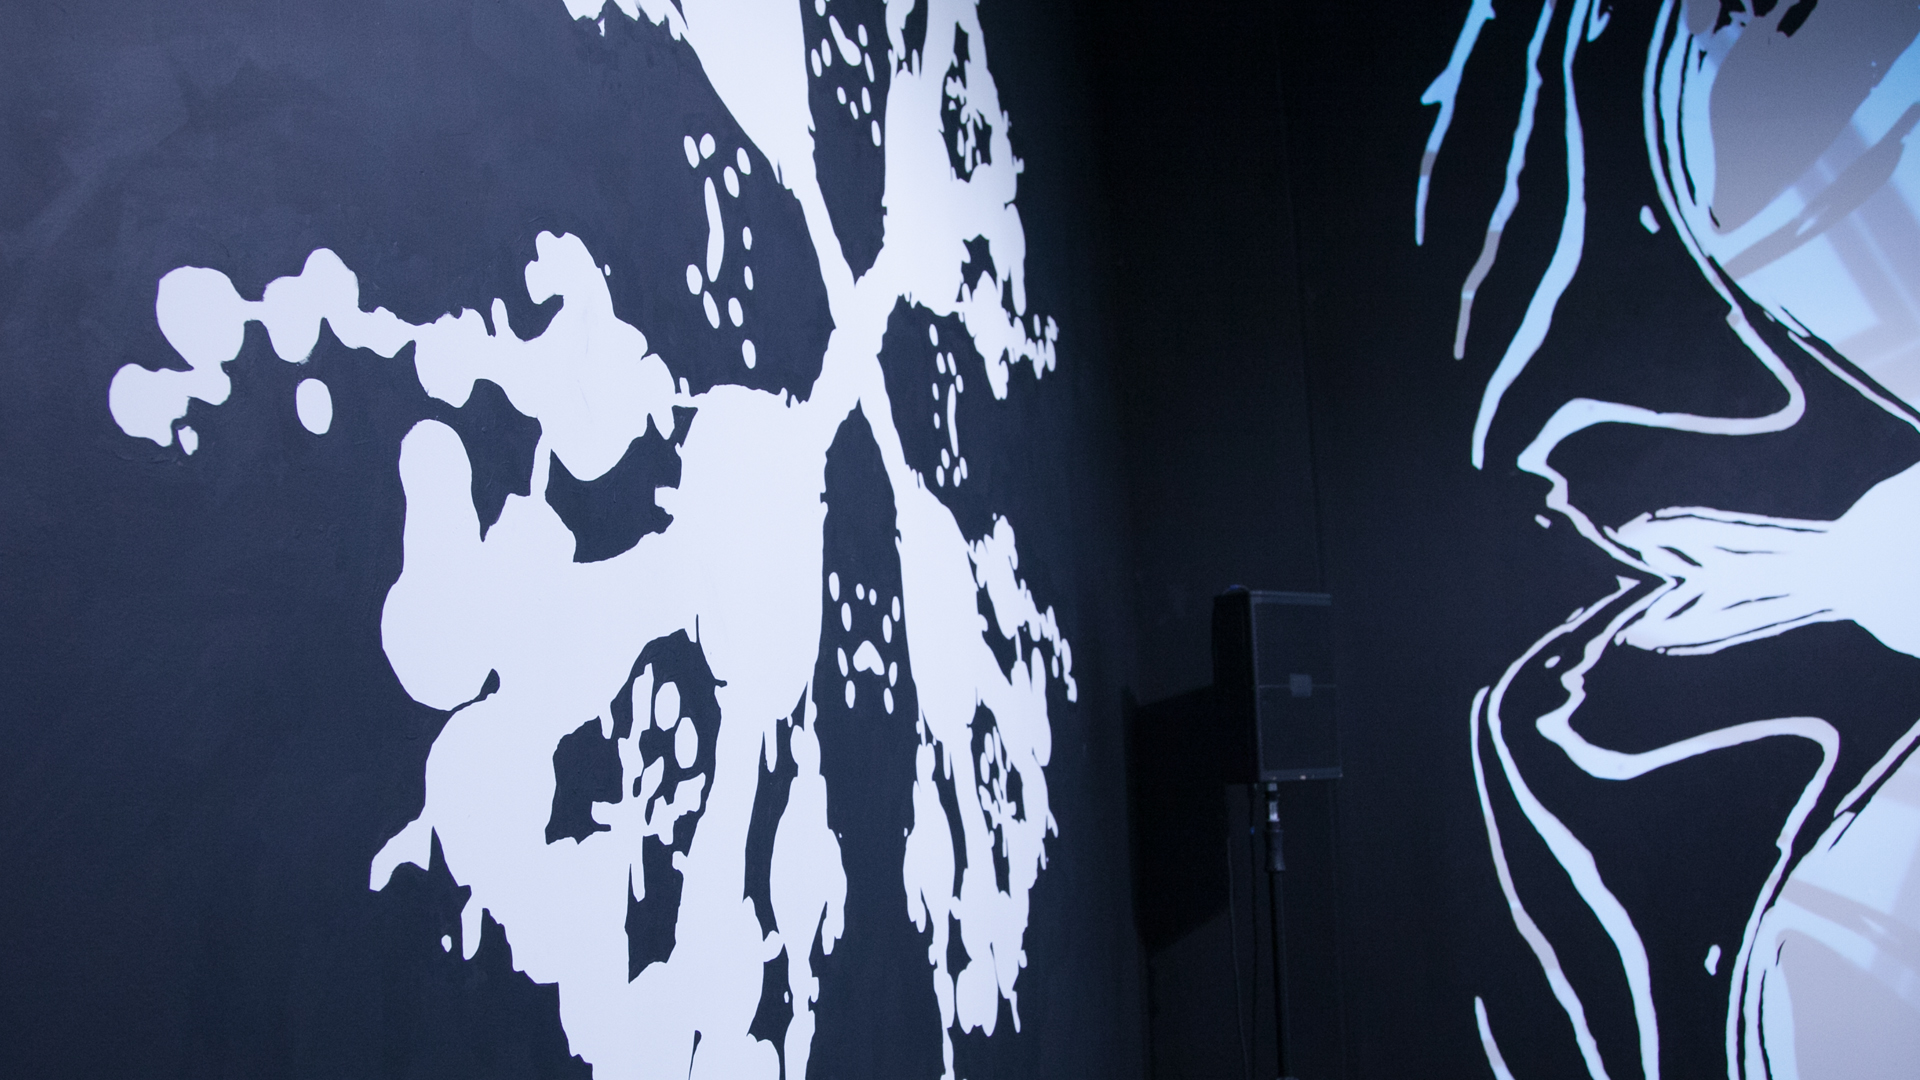 00 Project - hand painted murals with projection mapping